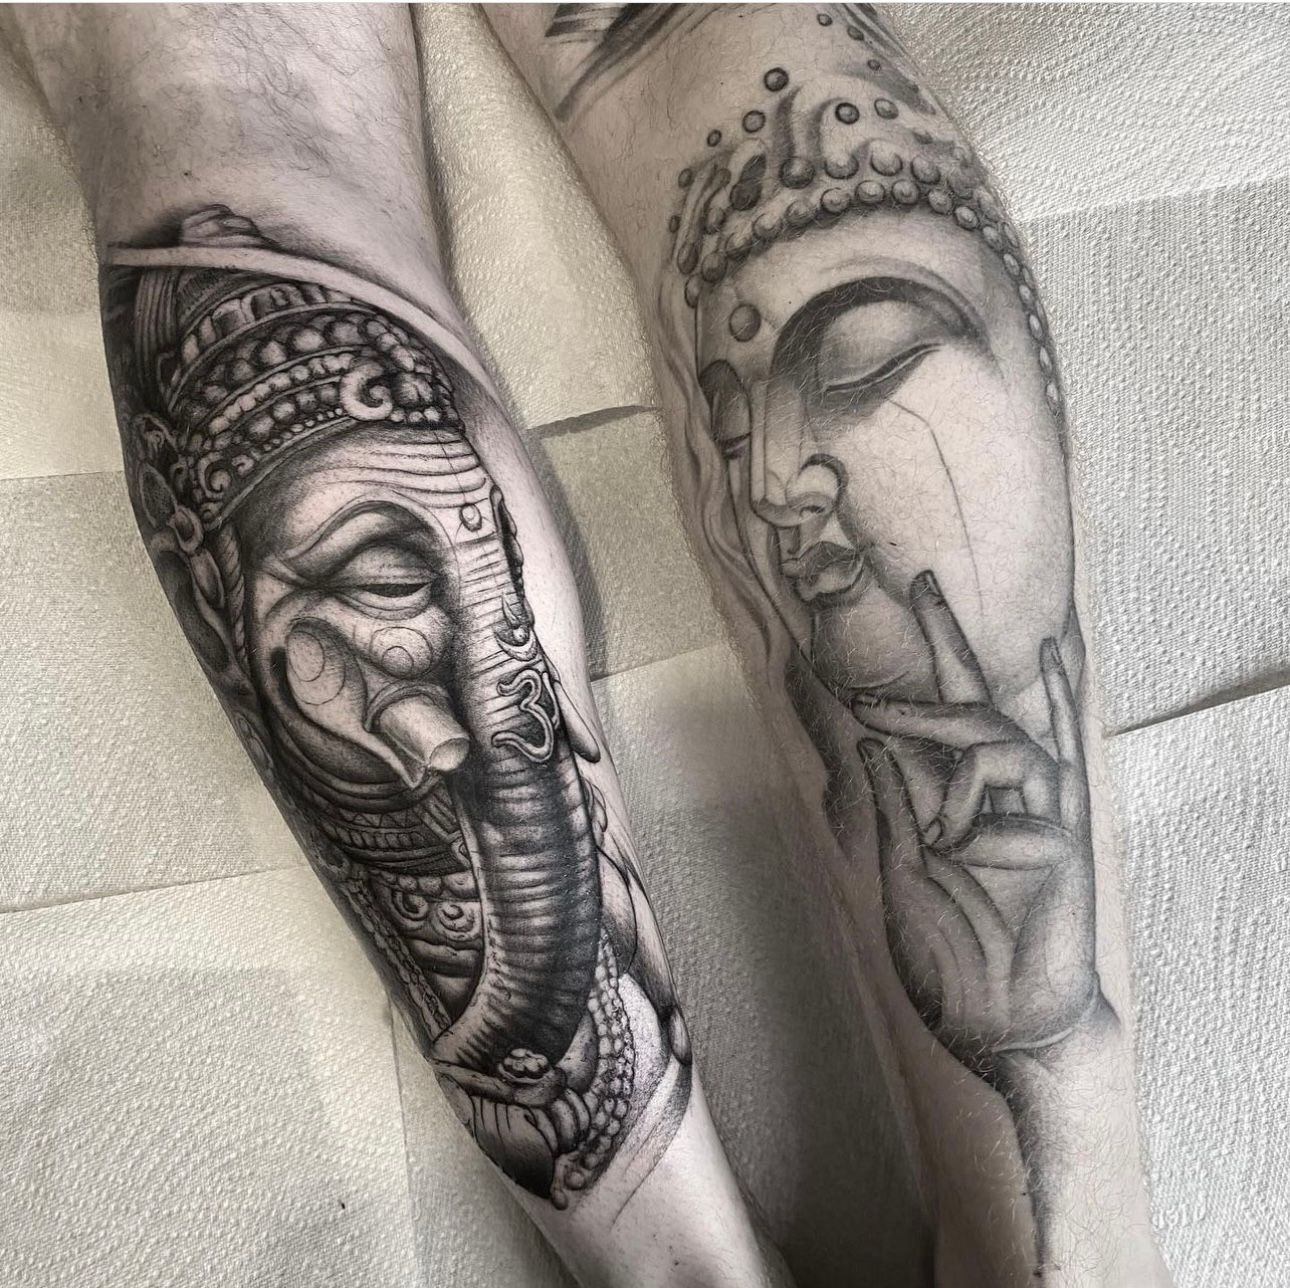 Tattoo uploaded by Joel Bobadilla • Tattoo coverup by Placaso on my leg  with this masterpiece! • Tattoodo